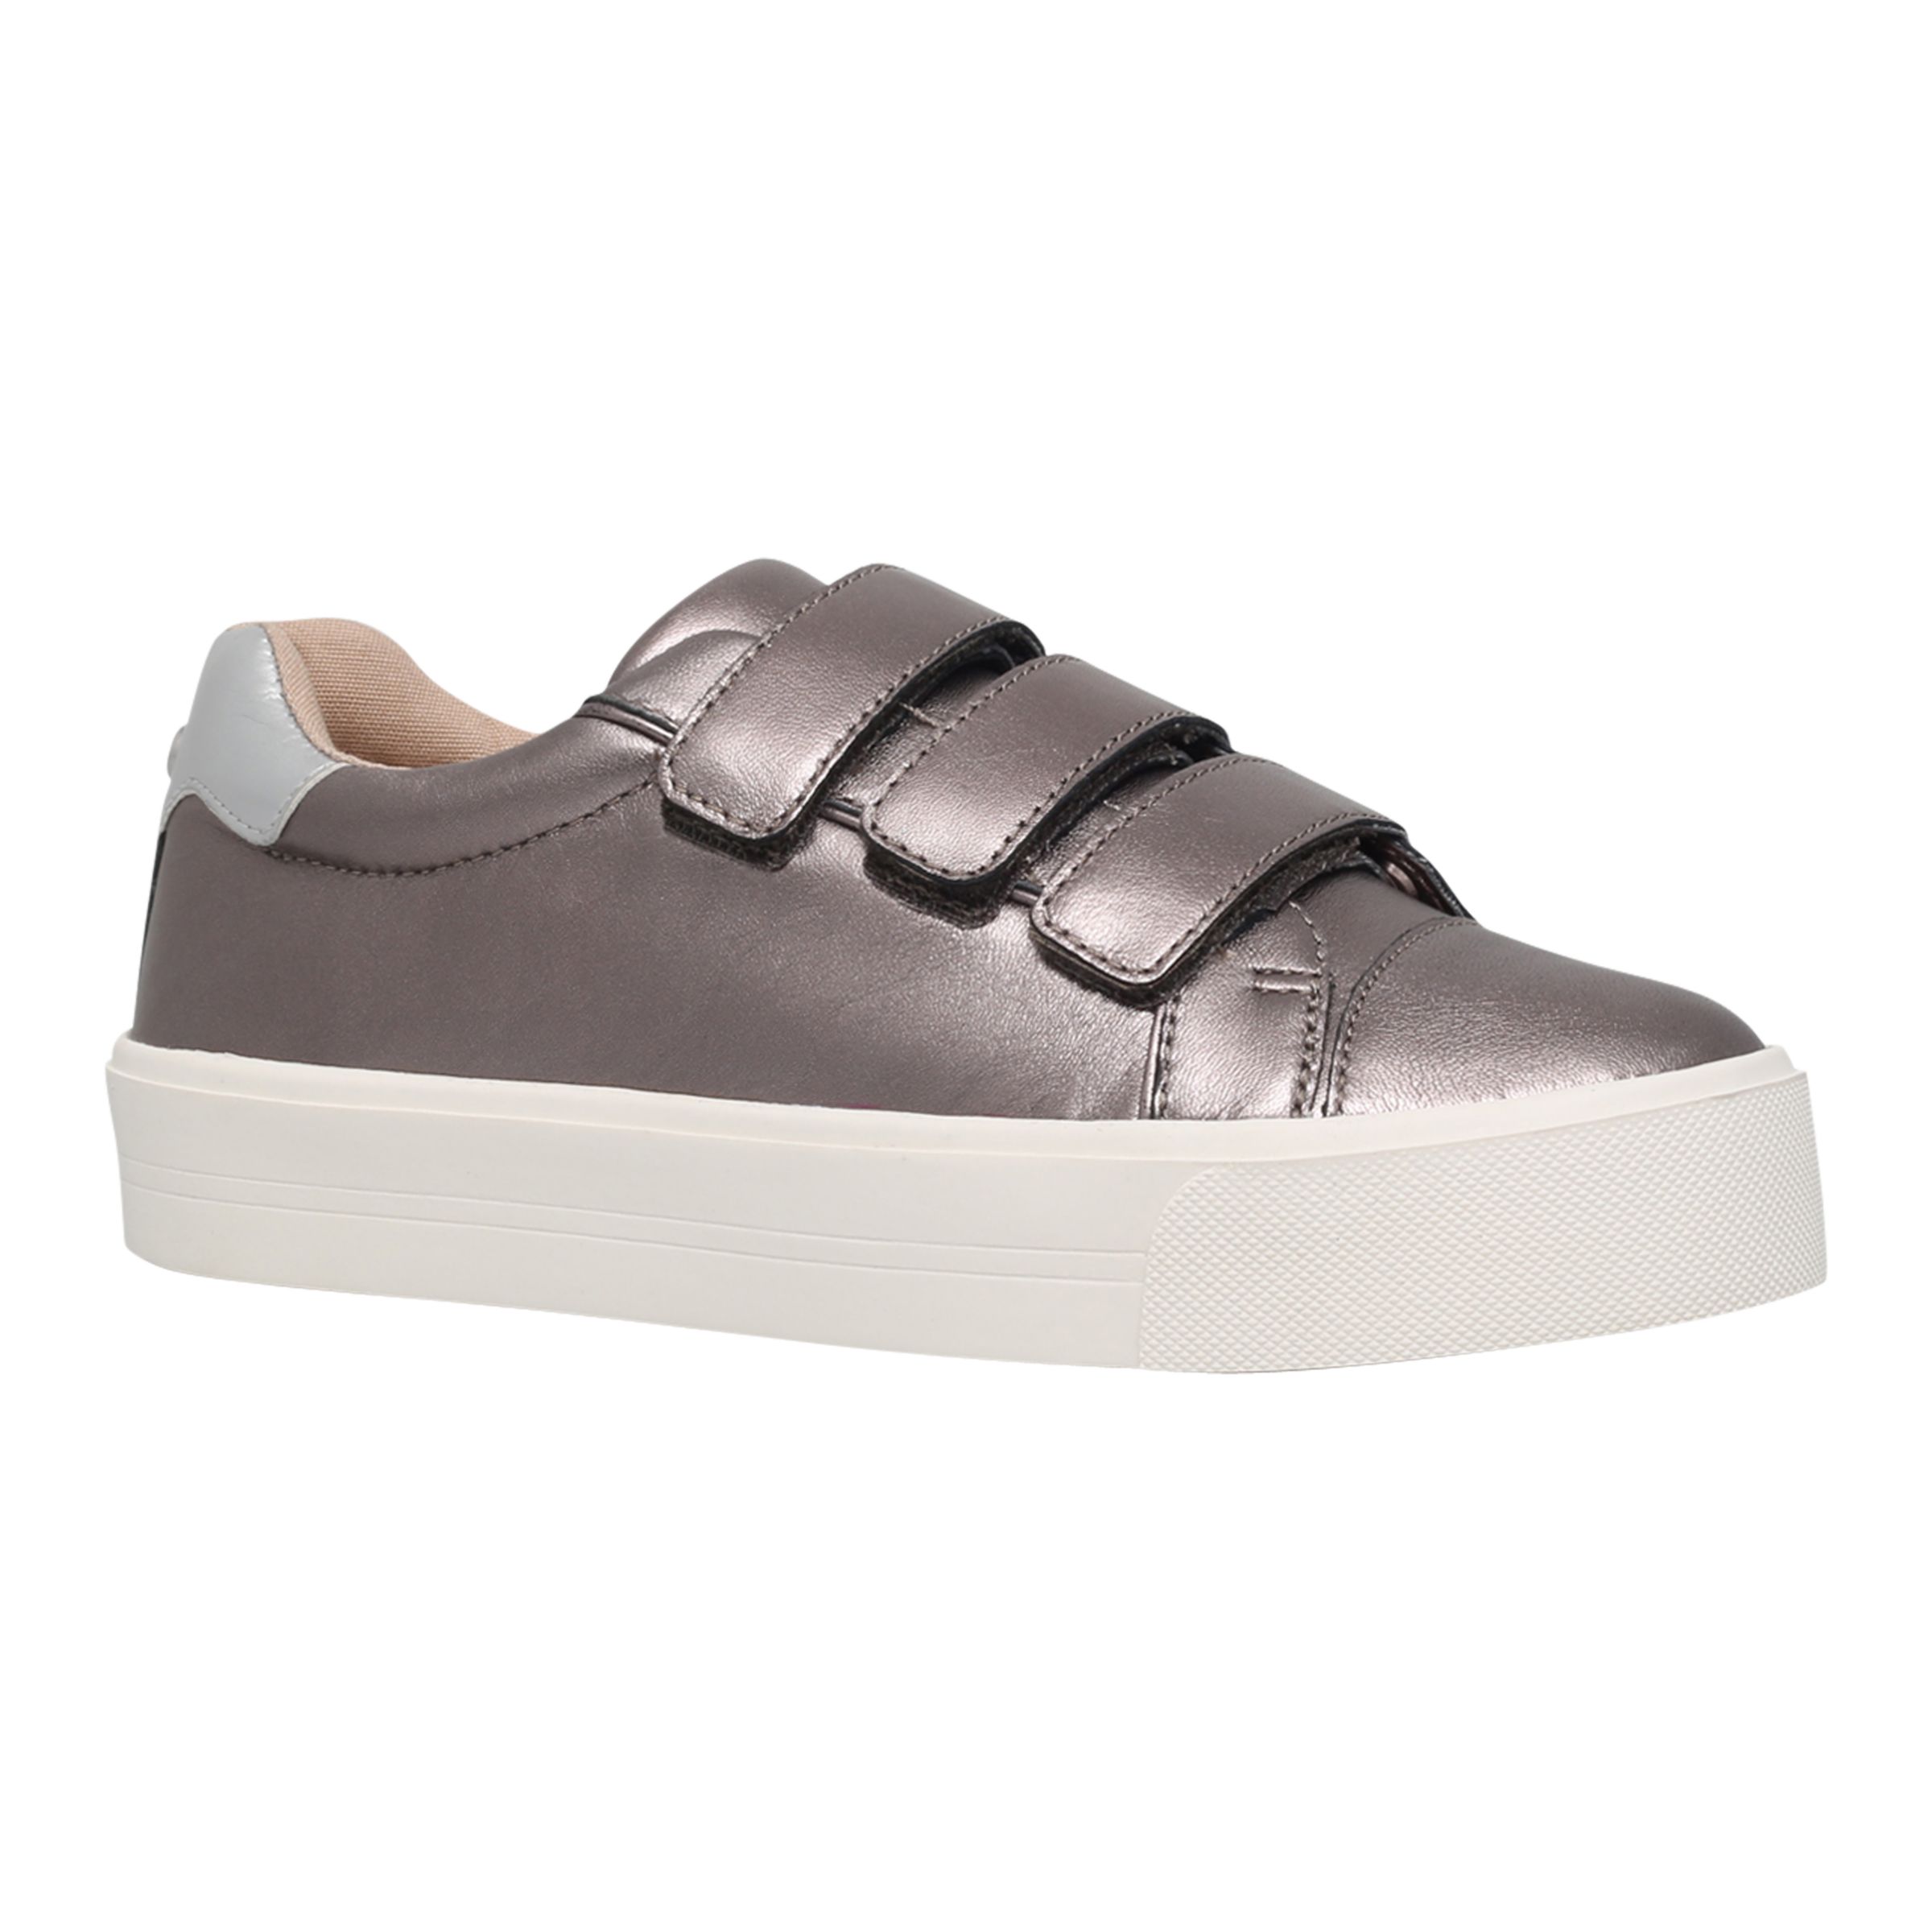 Carvela Lily Leather Sports Shoes, Pewter, 3